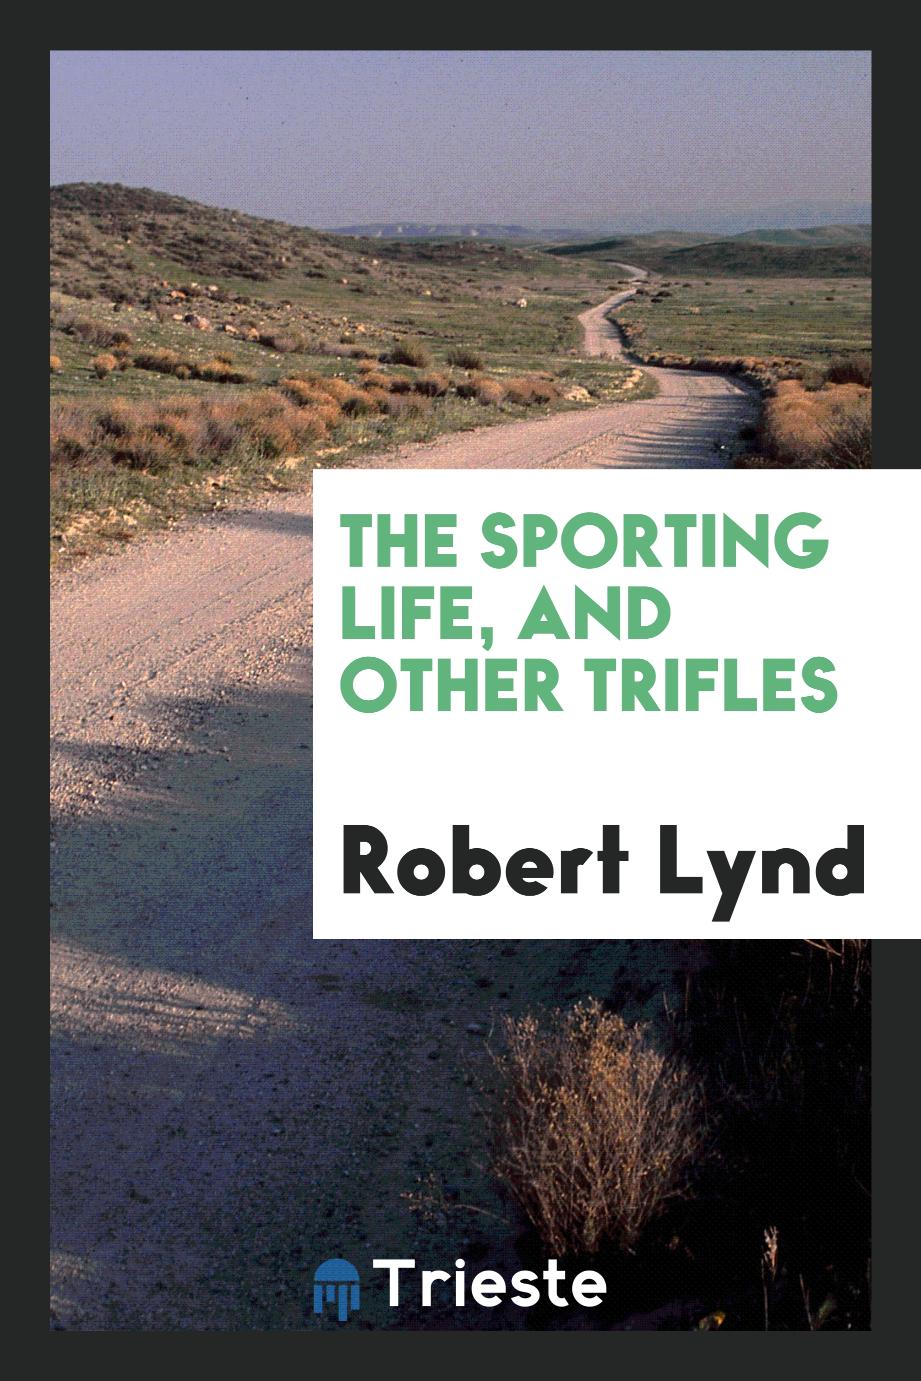 The sporting life, and other trifles